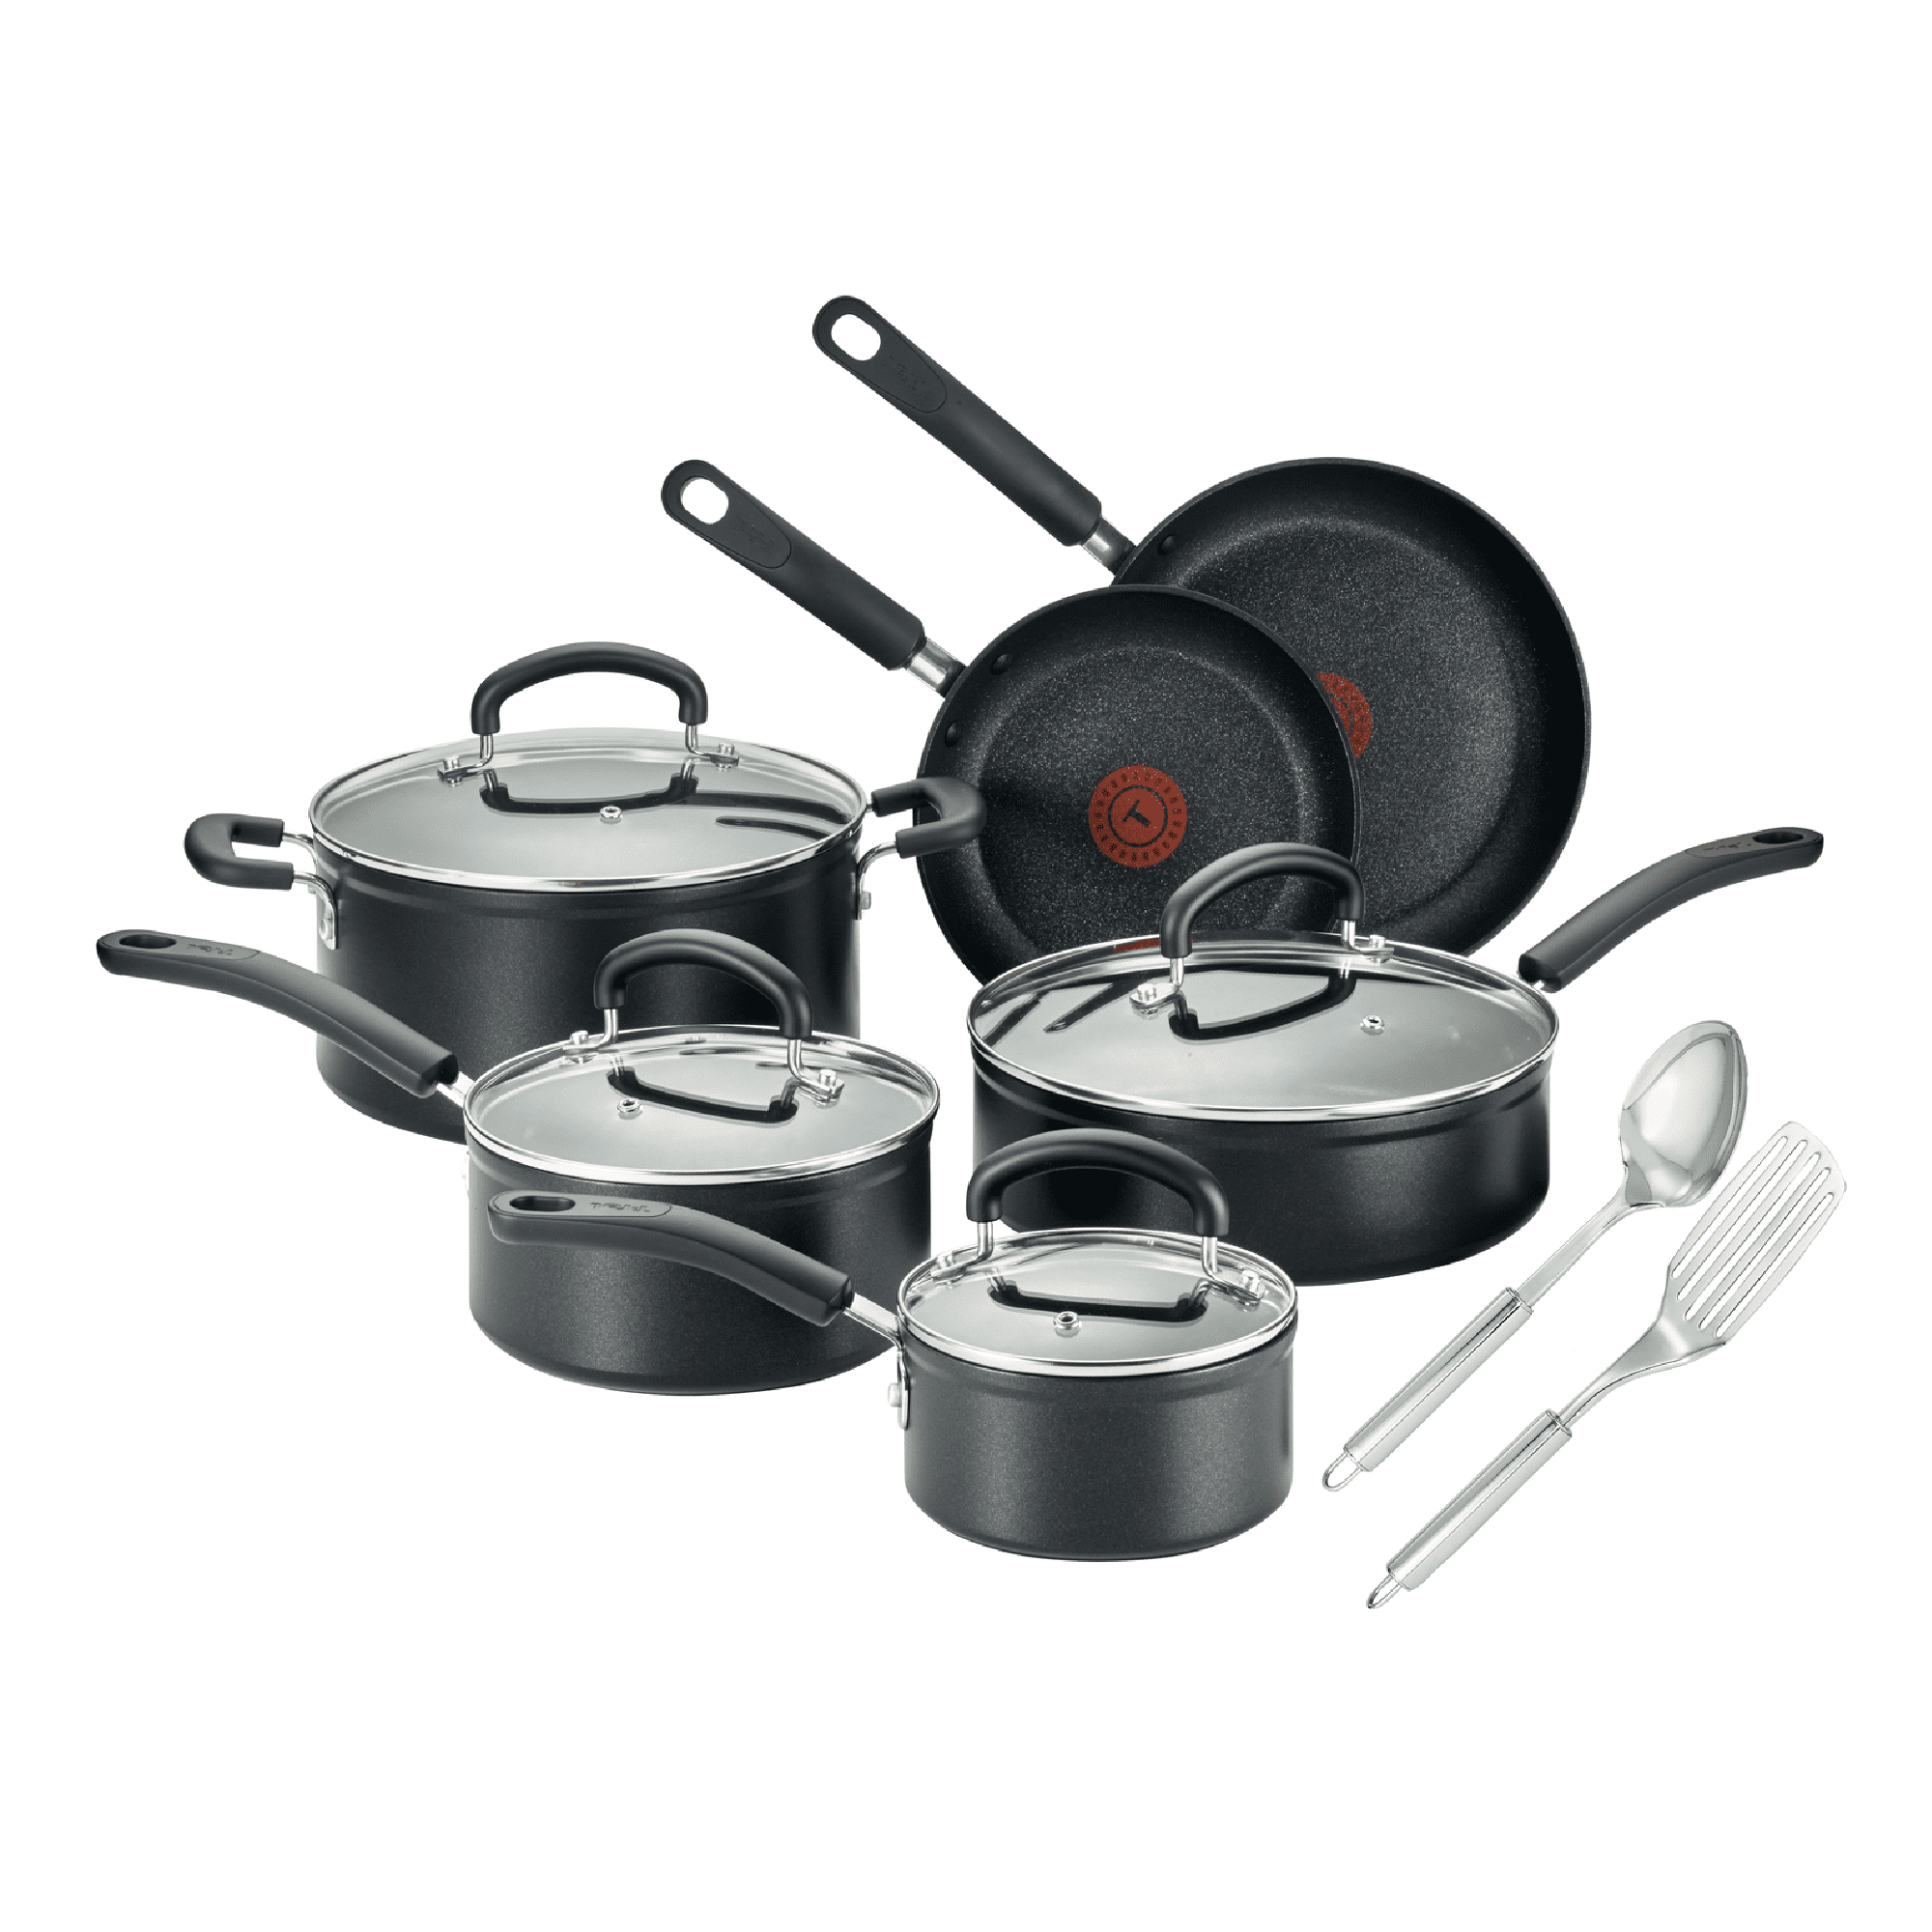 T-fal Ingenio Nonstick Cookware Set 13 Piece Induction Oven Broiler Safe  500F Cookware, Pots and Pans, Oven, Broil, Dishwasher Safe, Onyx Black